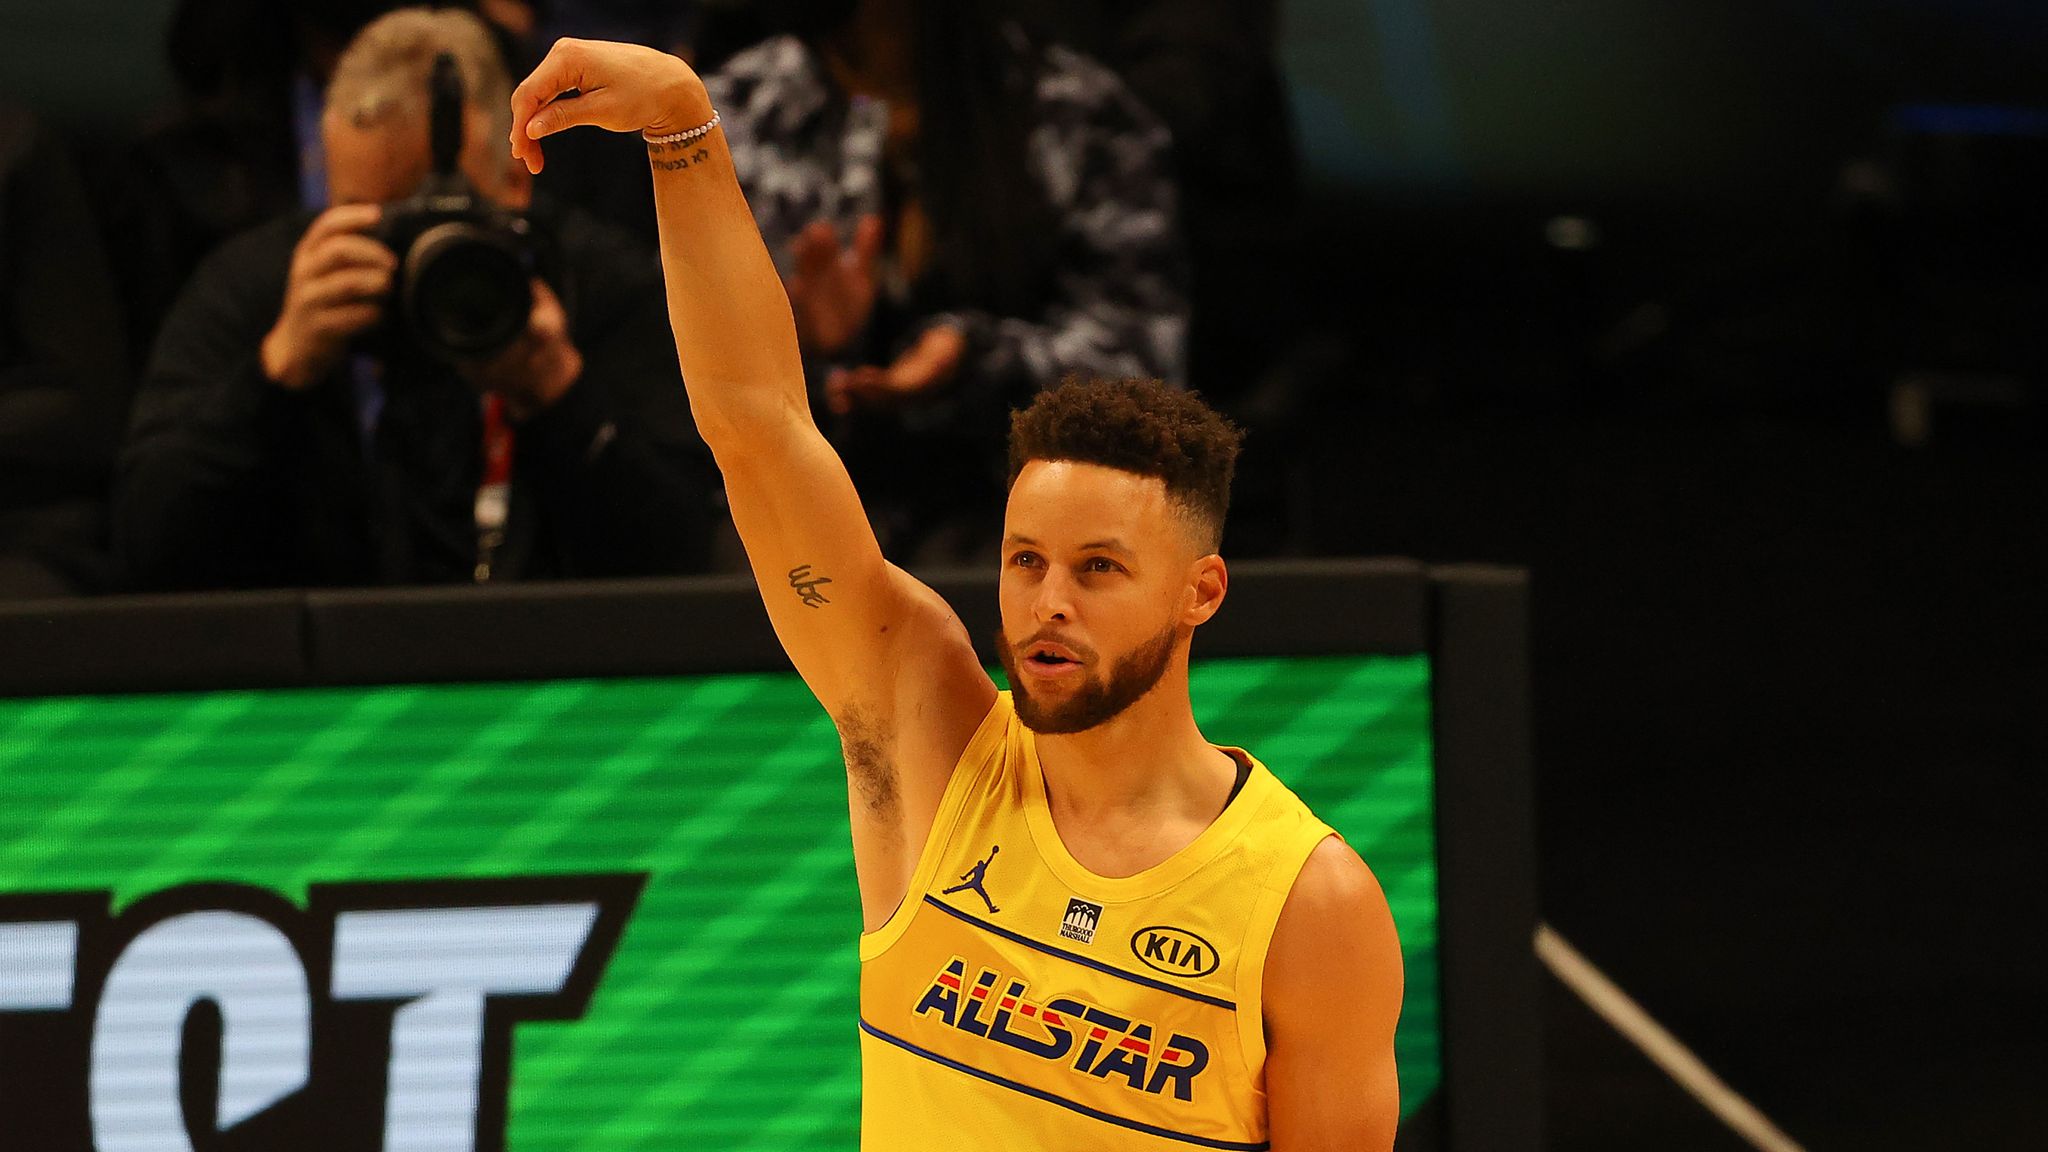 Steph Curry wins thrilling NBA AllStar 3Point Contest on final shot